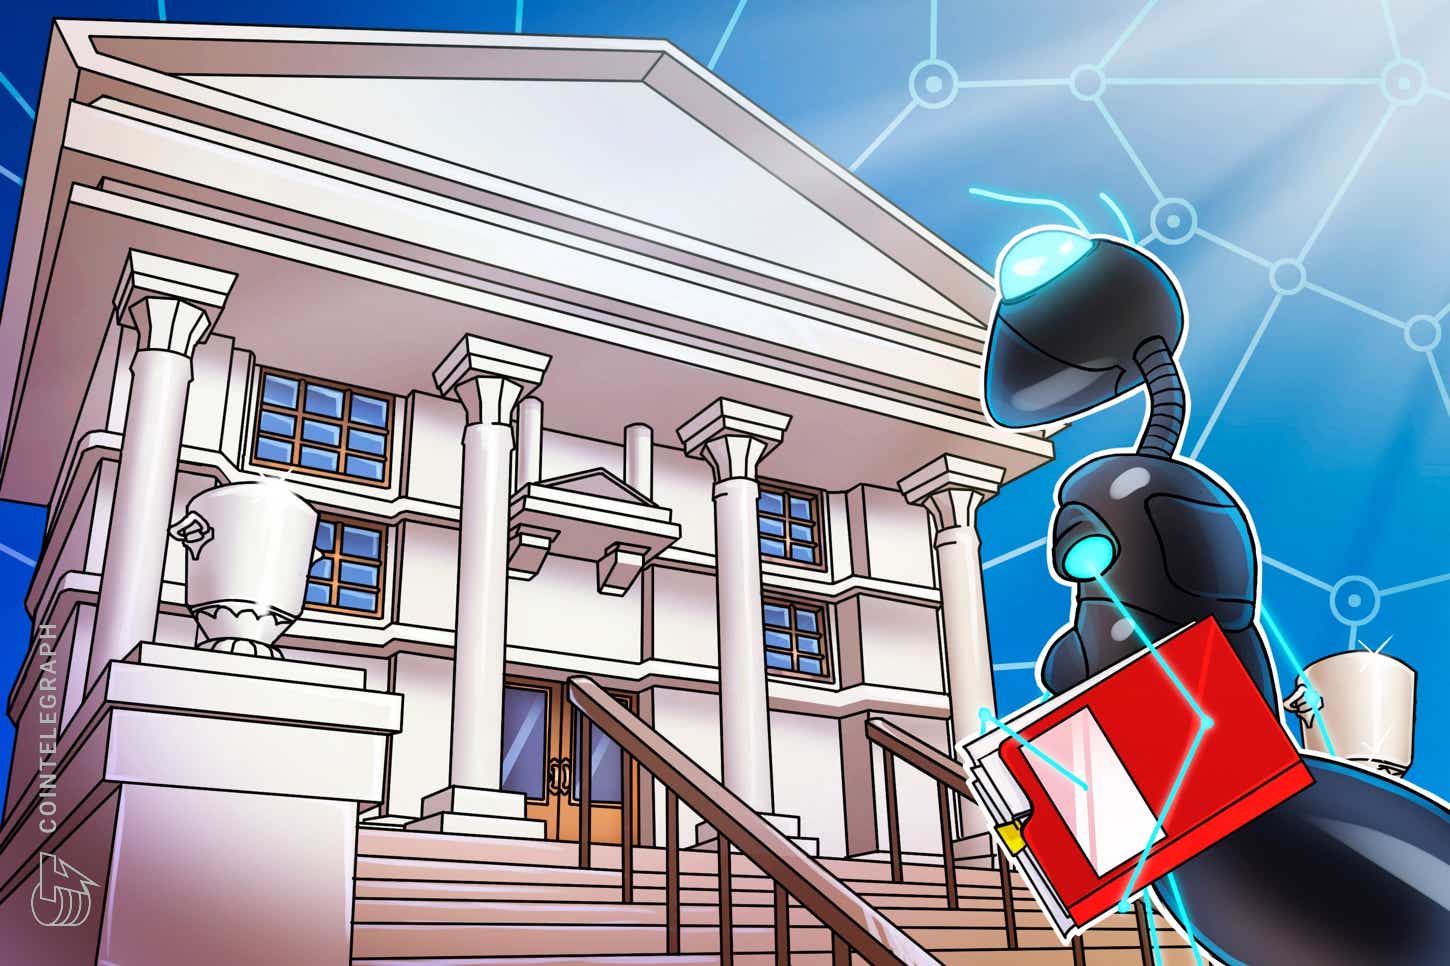 Us-treasury-report-says-stablecoin-legislation-is-‘urgently-needed’-to-address-risks